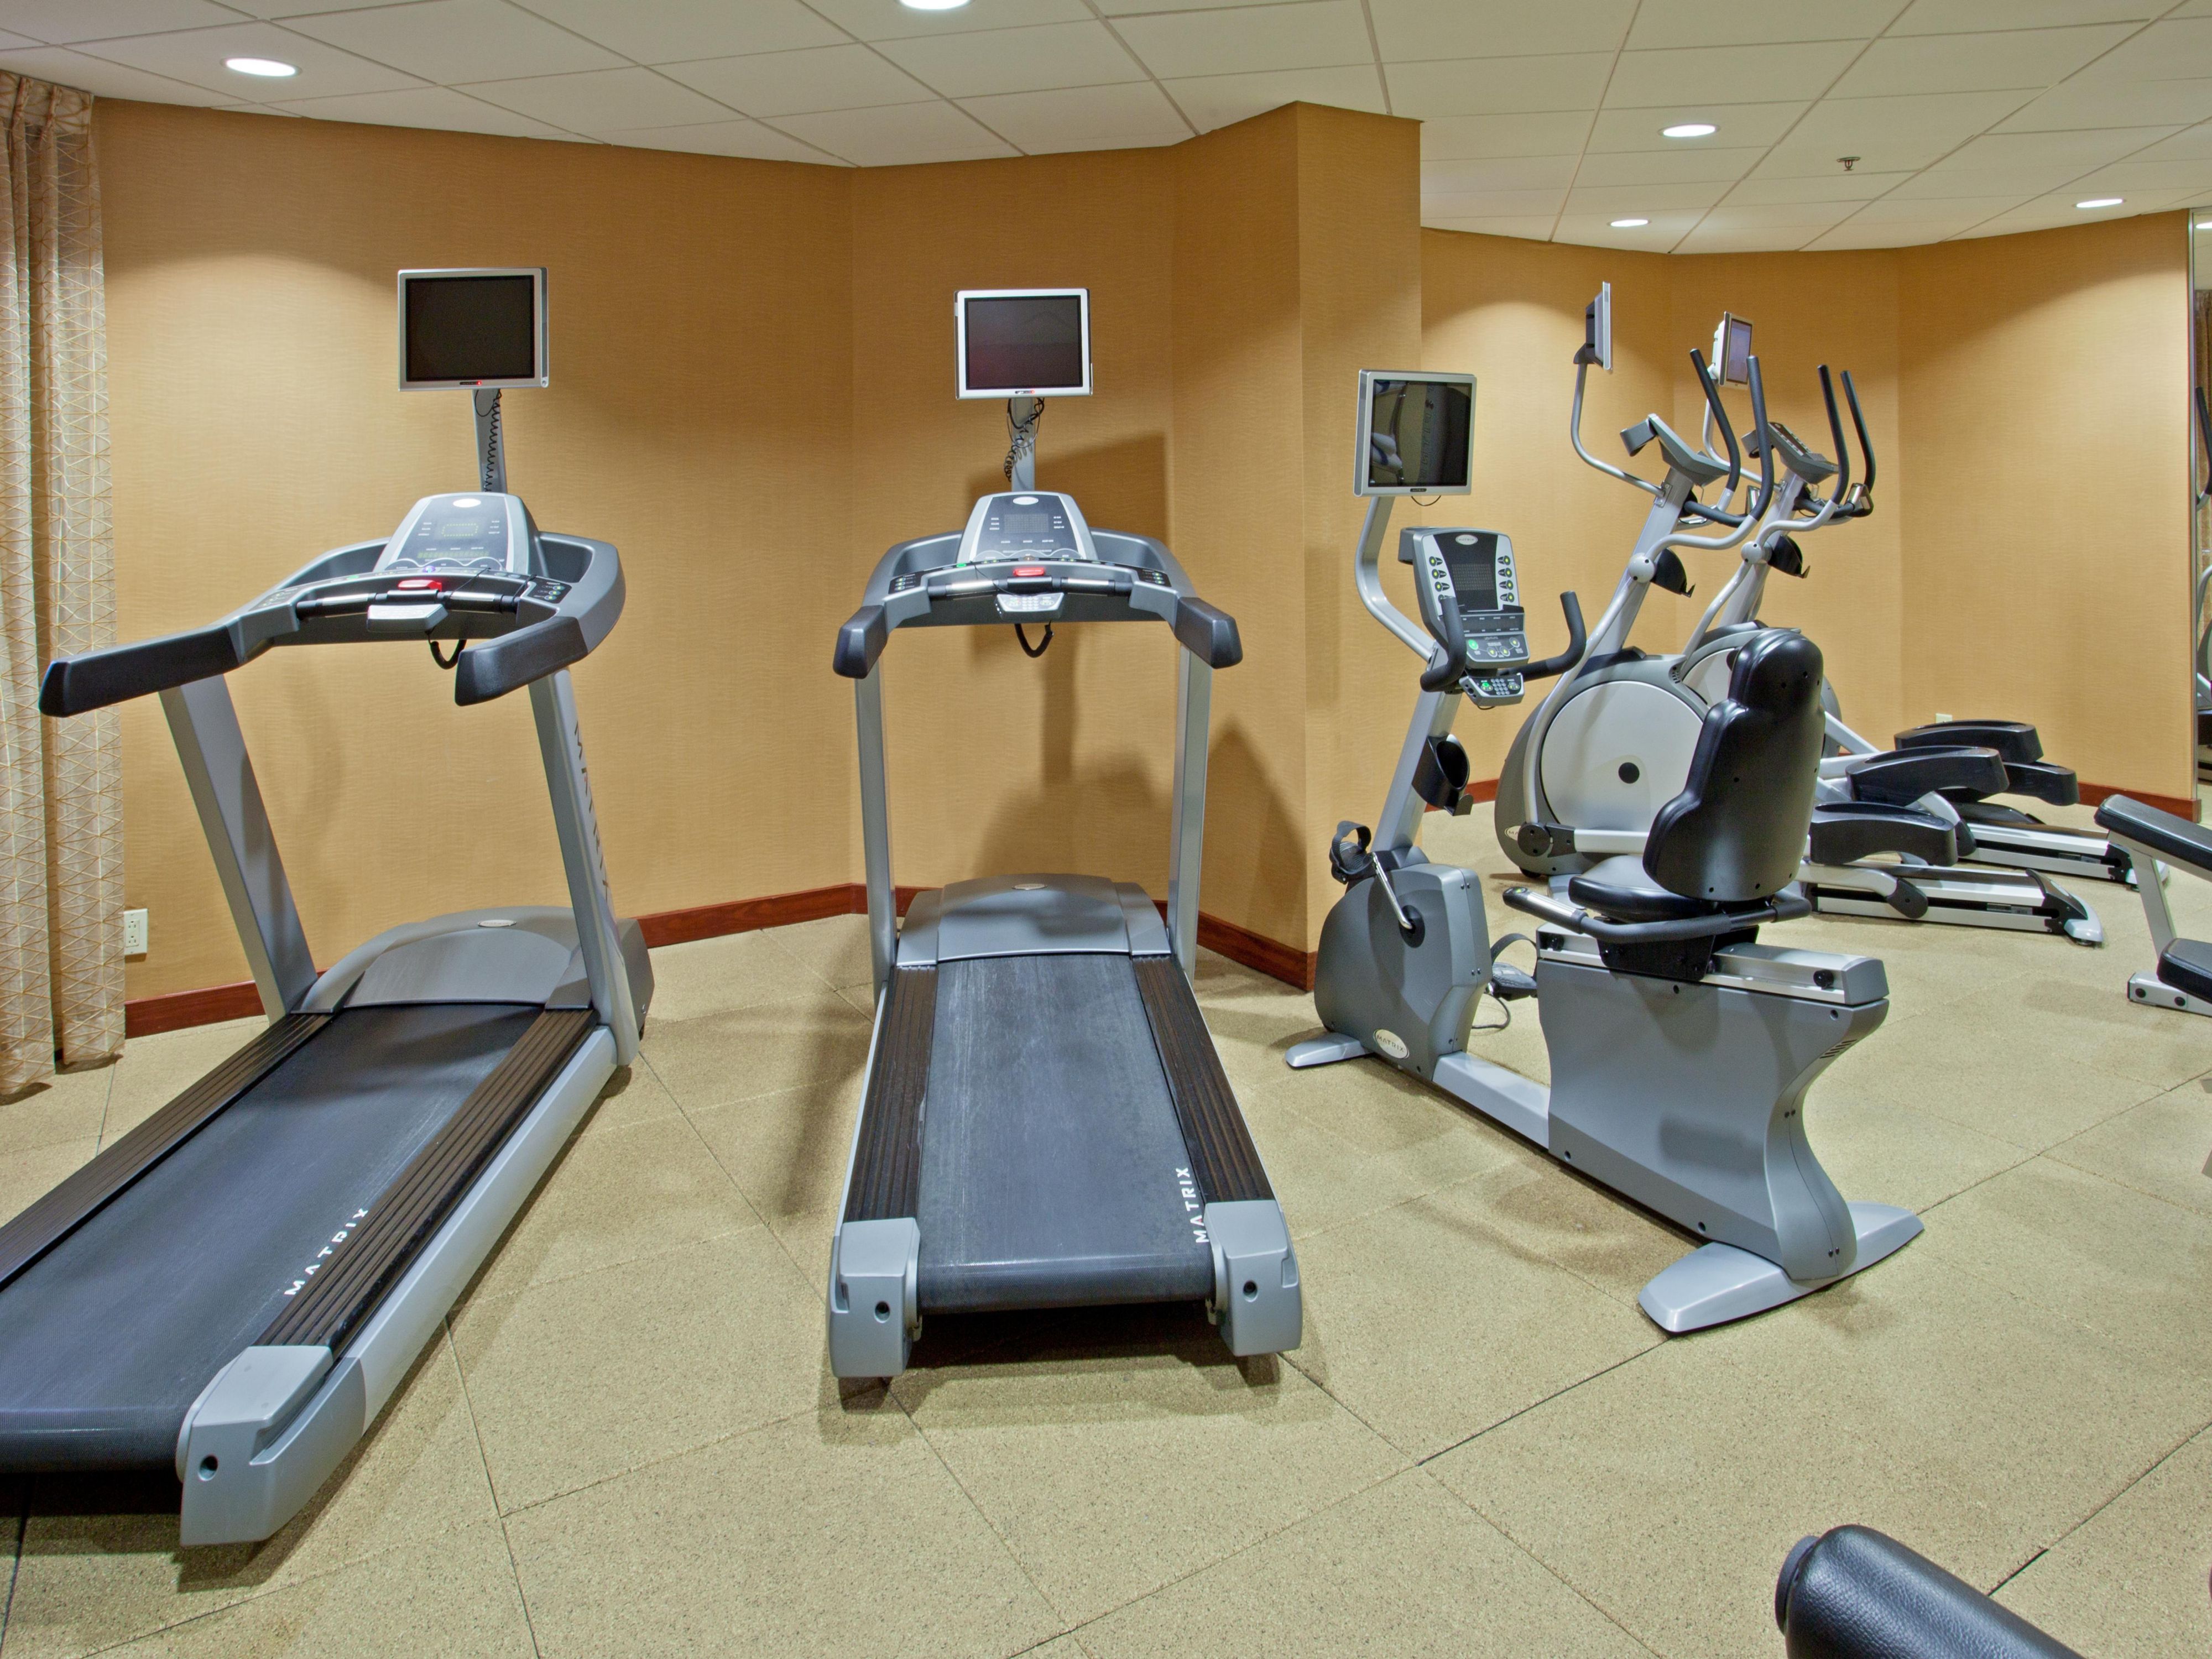 Energize your stay with fitness and wellness activities. Enjoy a workout in our Fitness Center with treadmills, stationary bikes, ellipticals, a workout bench, and free weights. Dive into our large outdoor pool or relax on the lounge chairs with umbrellas for shade. Play outdoors at nearby golf courses, walking trails, and tennis courts.